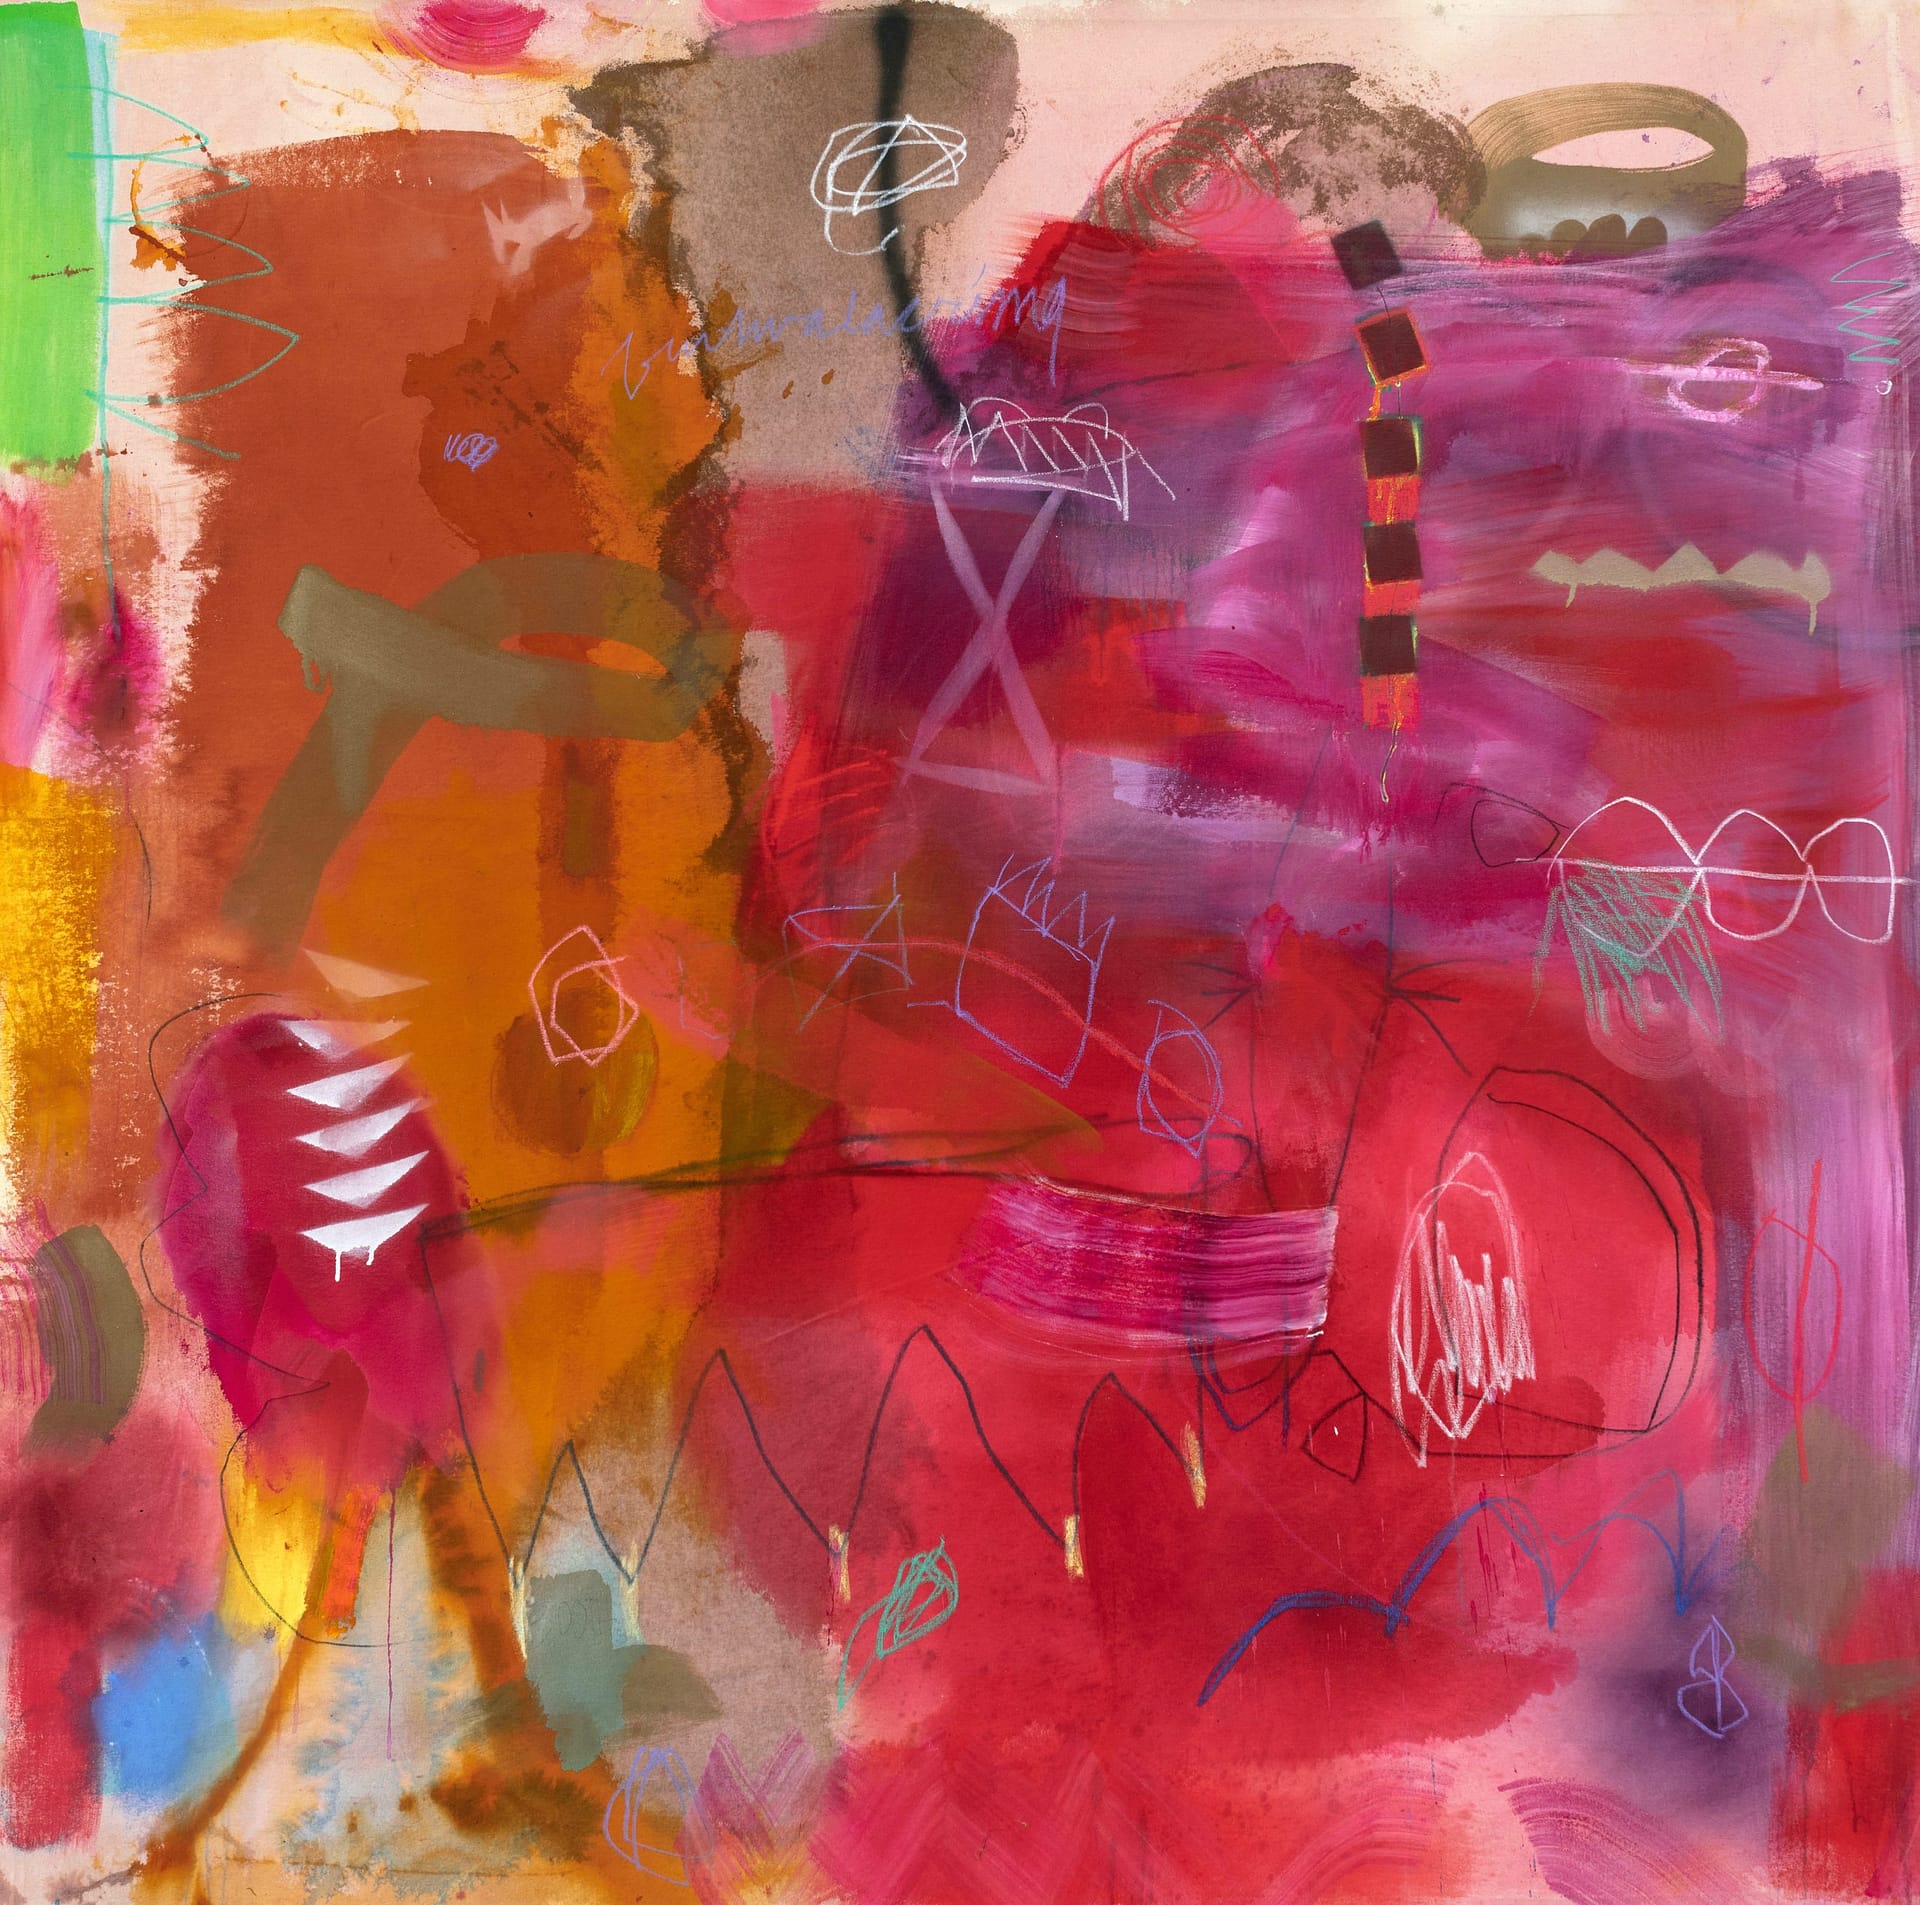 Mozambique_Jane Booth_Acrylic, House Paint, Spray Paint, Watercolor Crayons on Raw Canvas_65 x 65